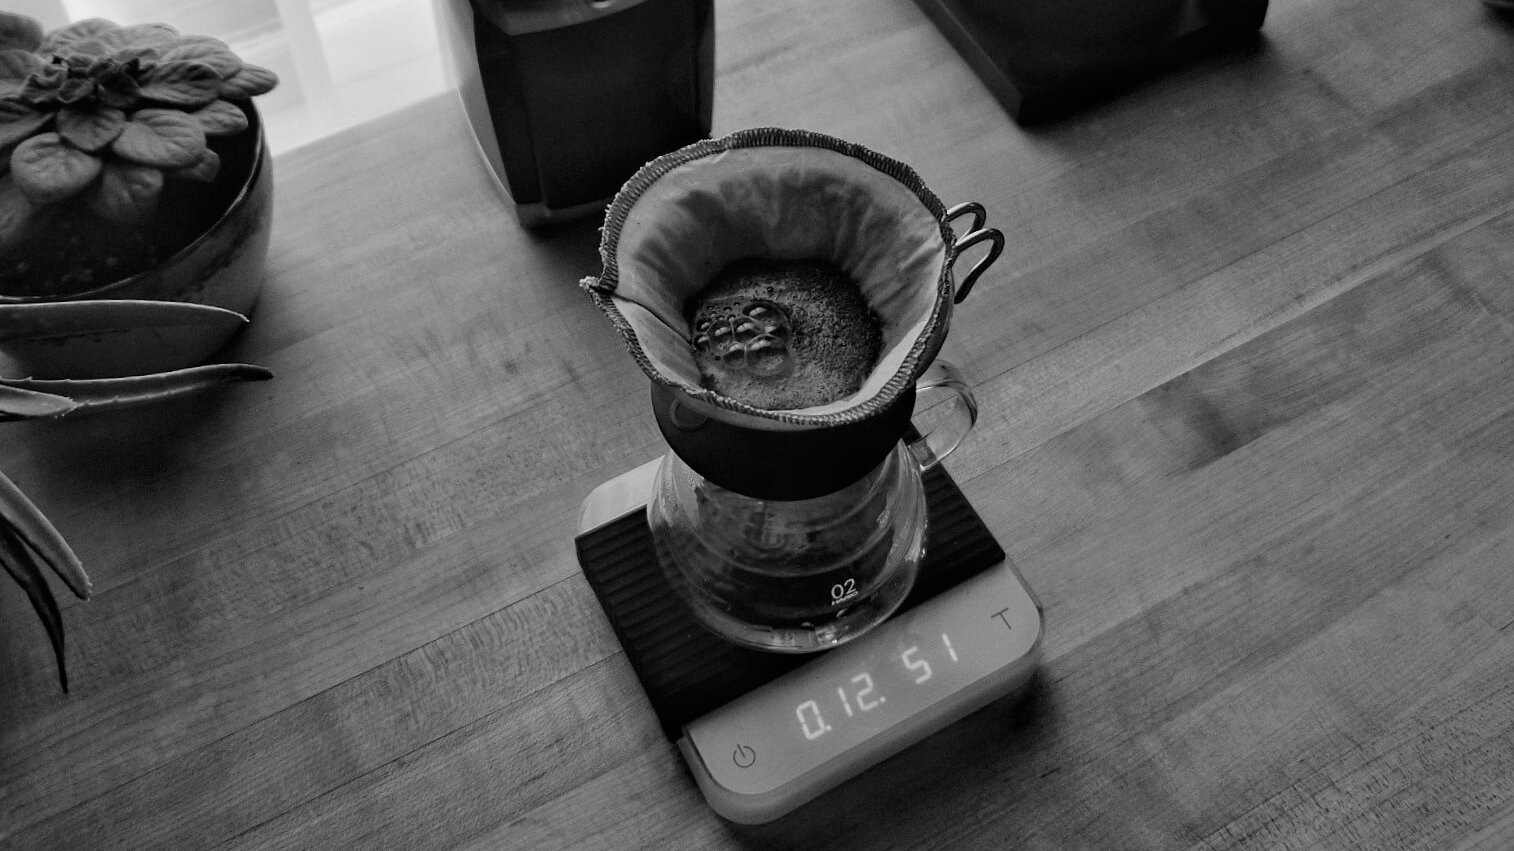 A Hario V60 with a cloth filter sits on a scale filled with brewing coffee.